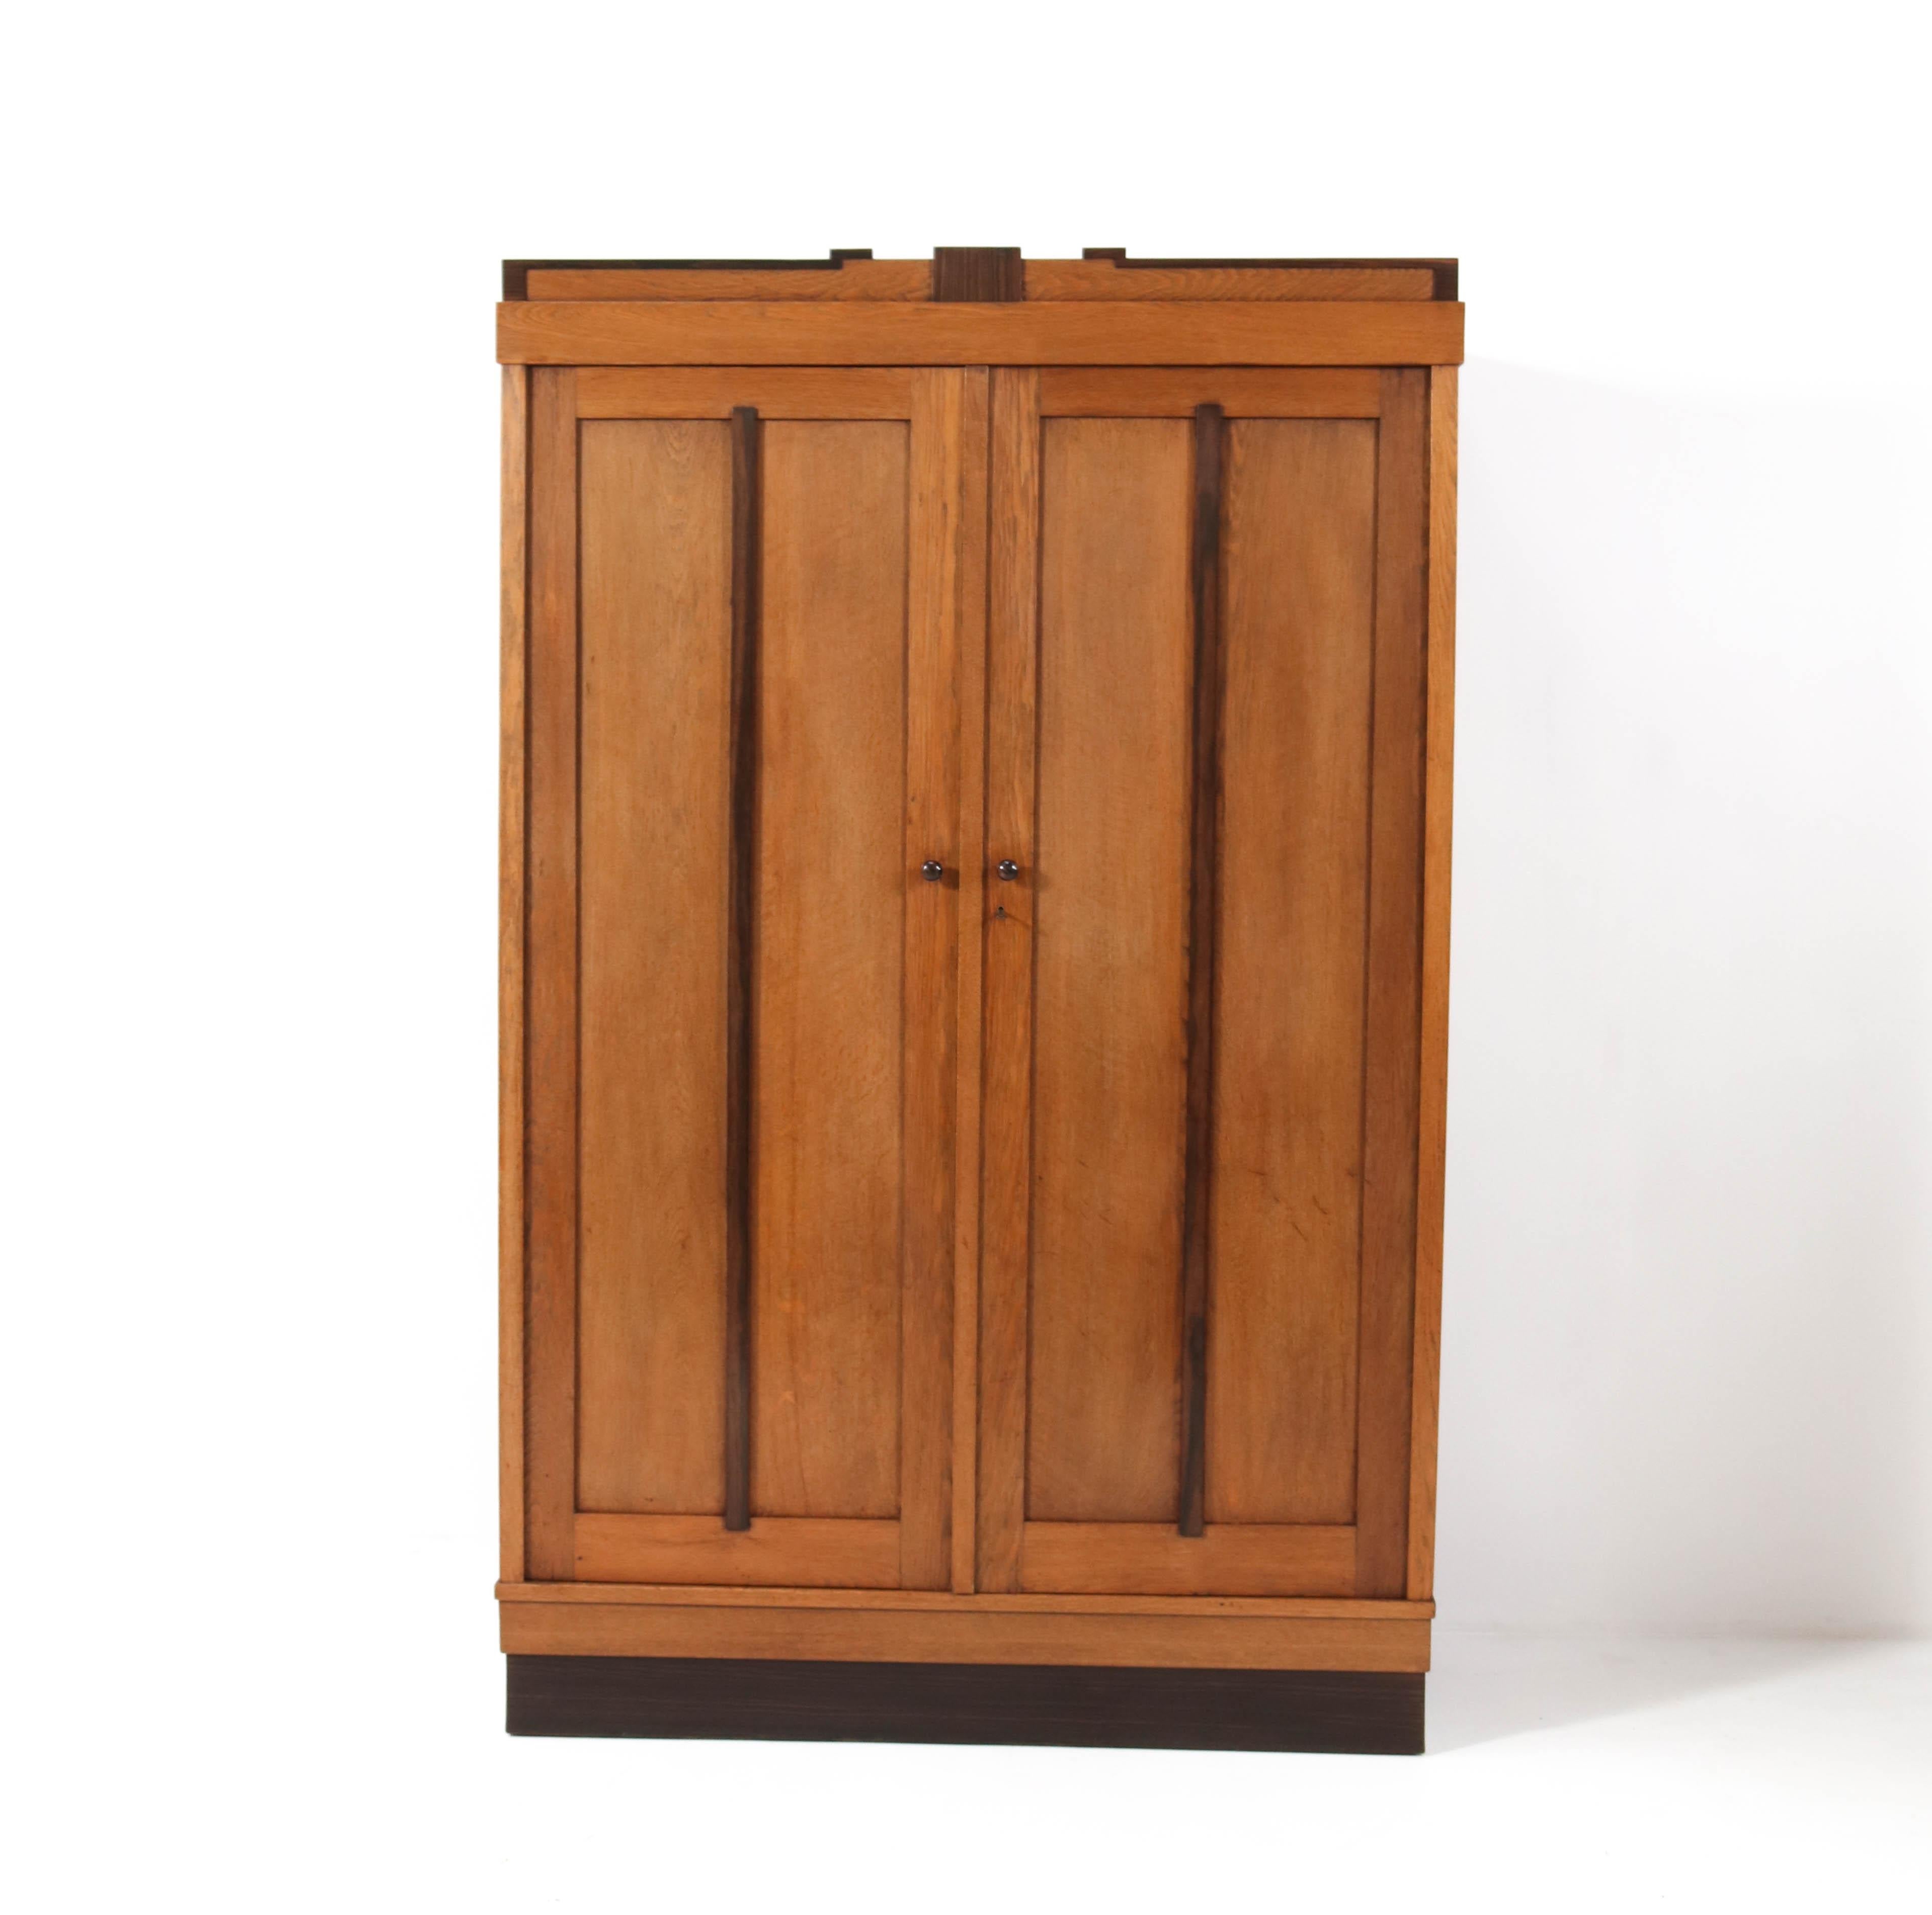 Stunning and rare Art Deco Amsterdamse School armoire or wardrobe.
Striking Dutch design from the 1920s.
Solid oak with original macassar ebony details.
Four wooden shelves adjustable in height or in case you do not need shelves,
we can put in a